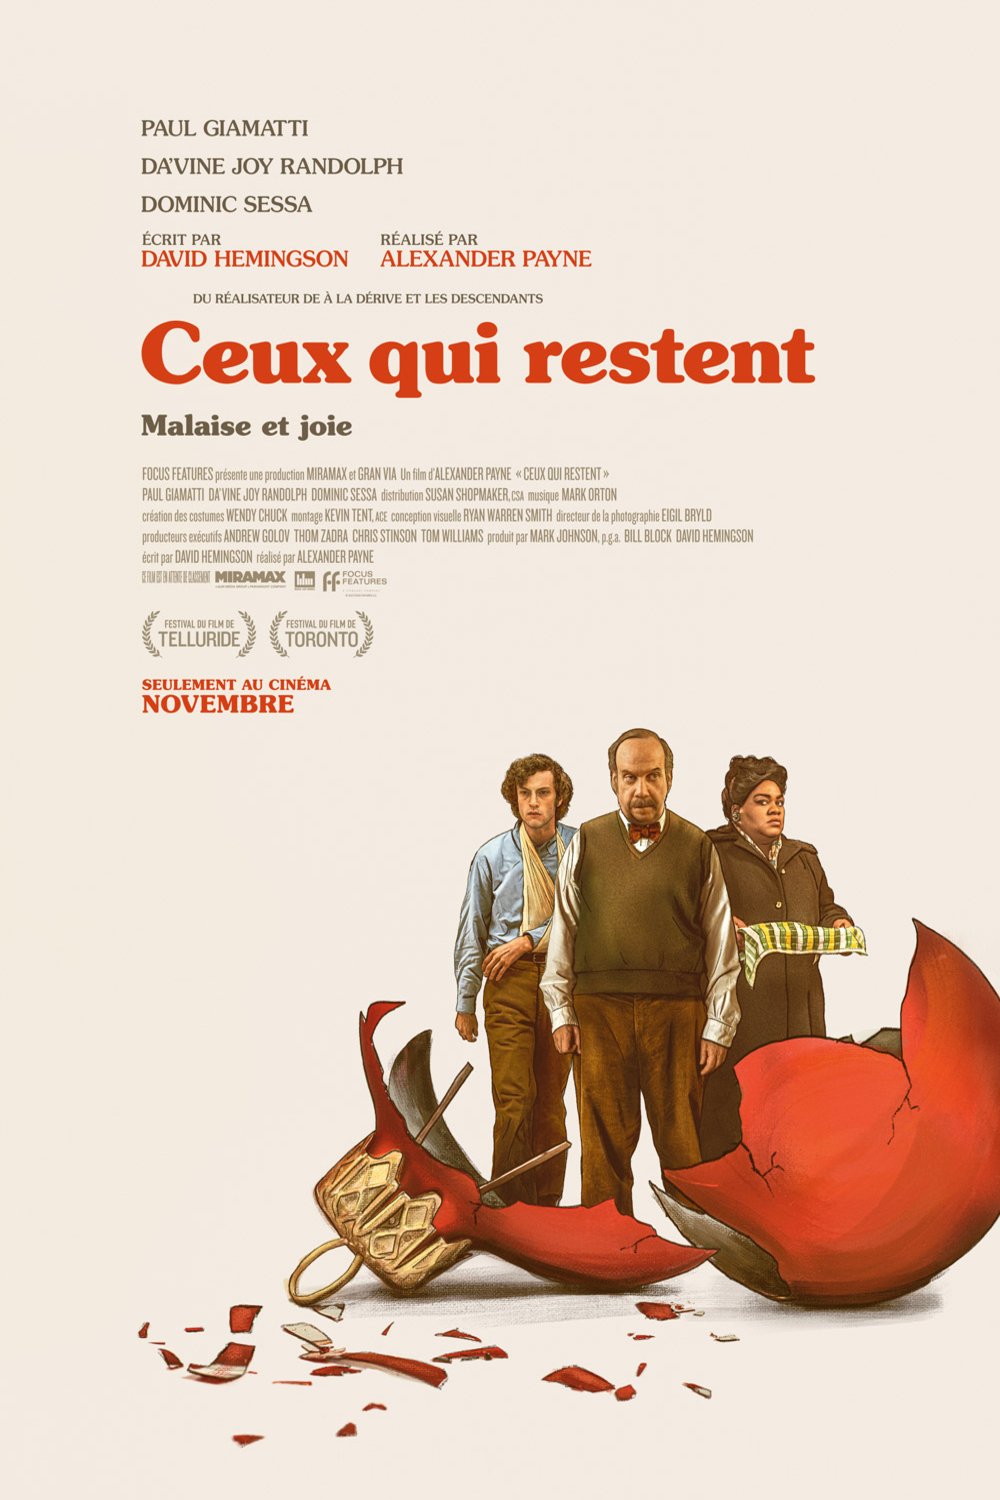 Poster of the movie Ceux qui restent